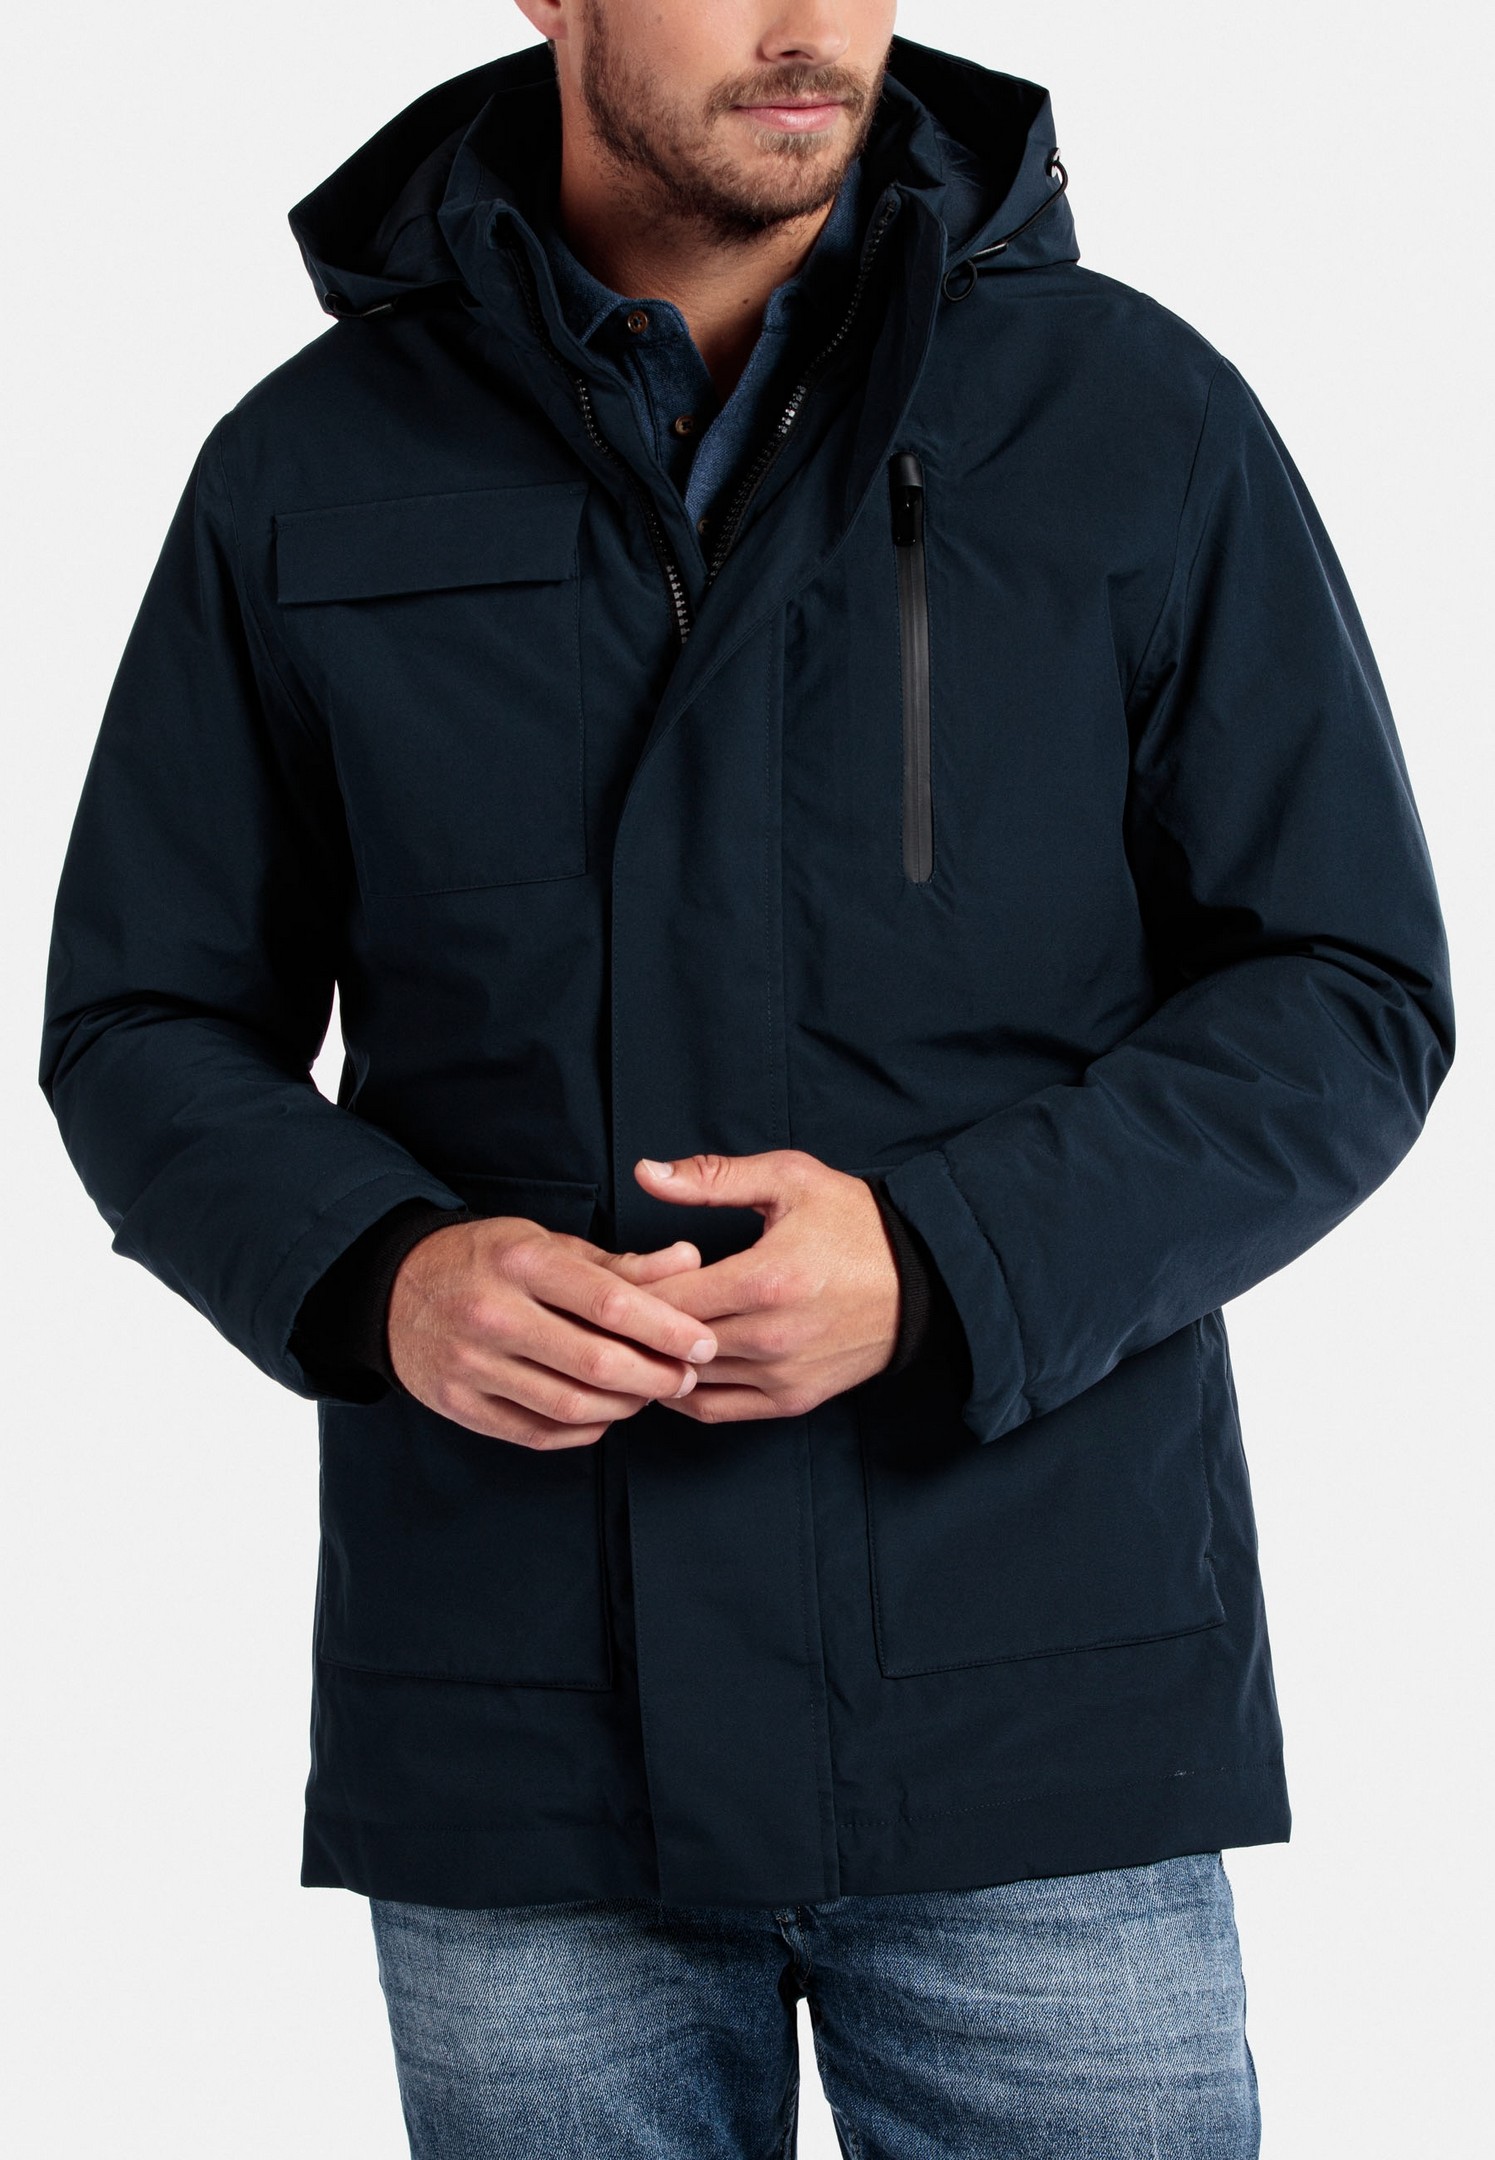 Giordano Jacket Removable and Water Fashion | Hood Jan Windproof Rozing Navy Dark Men\'s